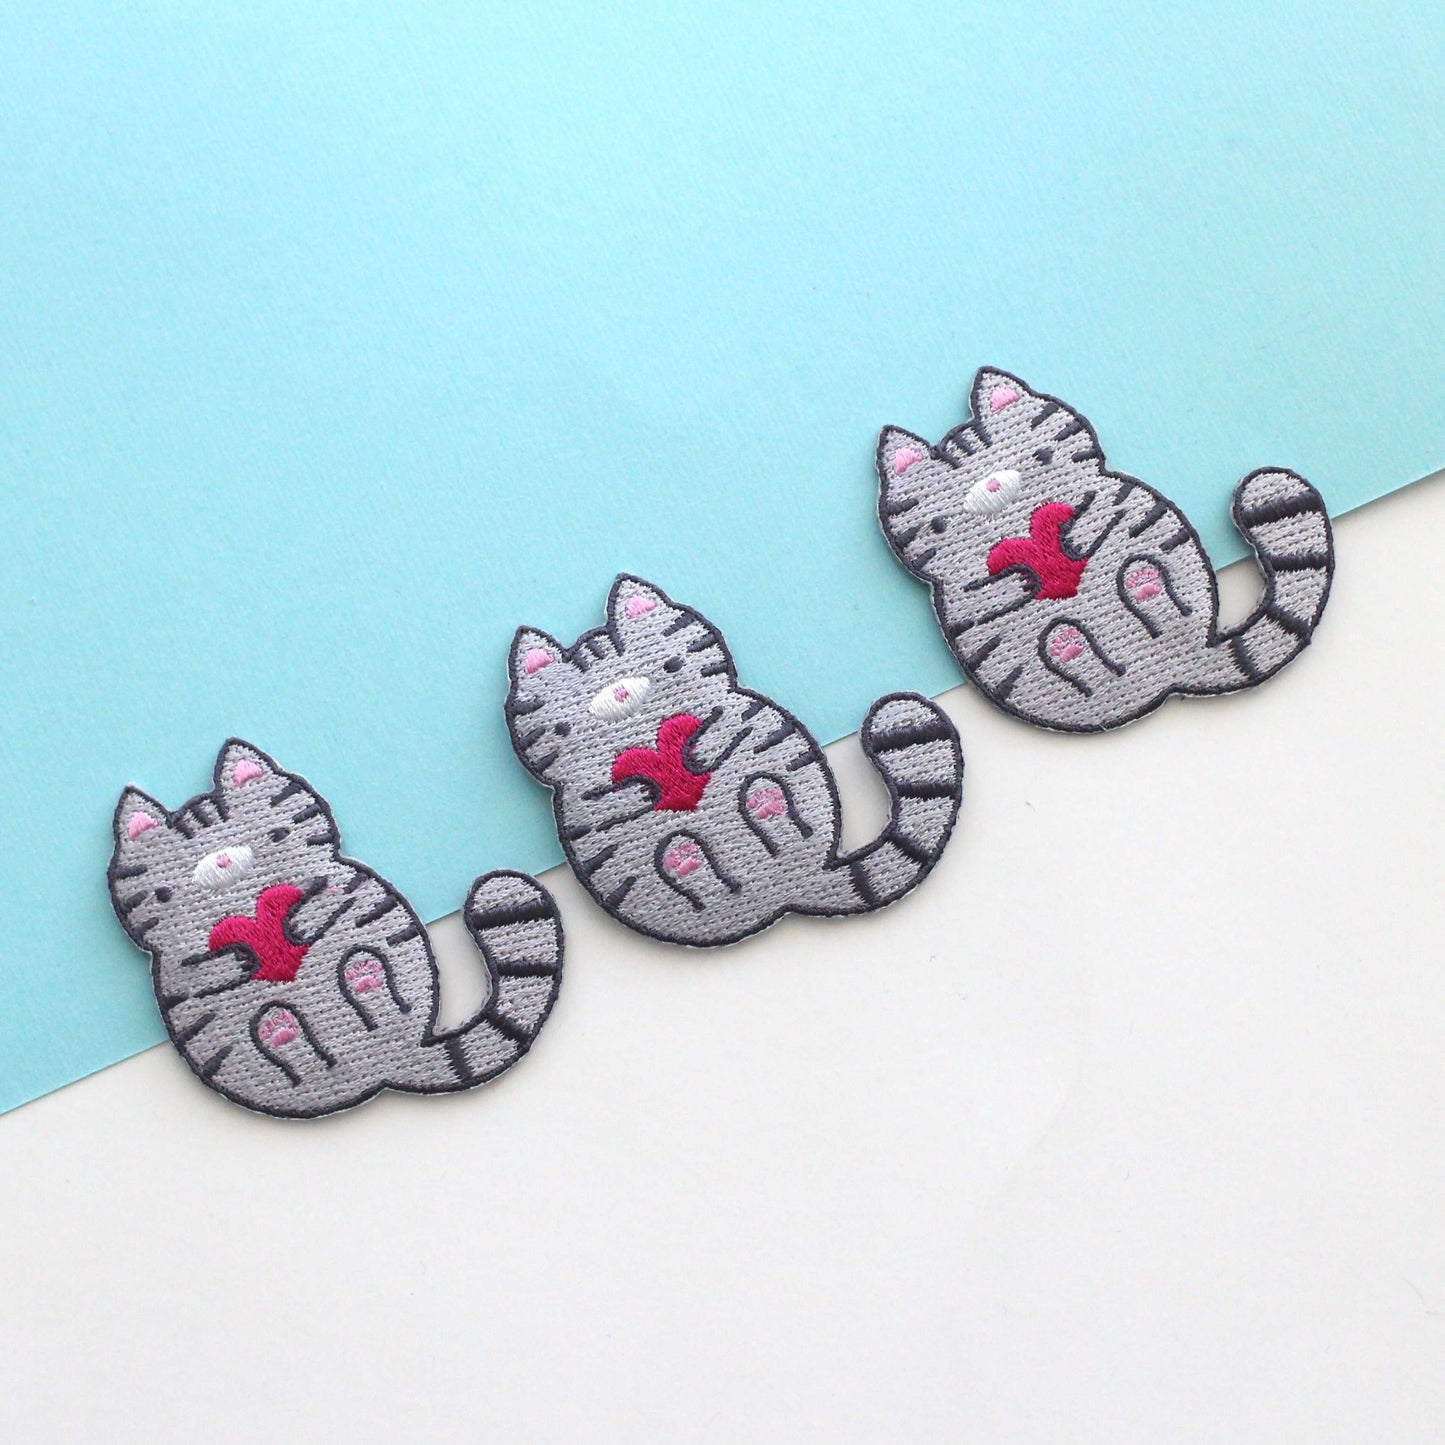 Grey Tabby Cat Embroidered Iron-On Patch - Cute Cat Patch - Heart Patch by Wild Whimsy Woolies